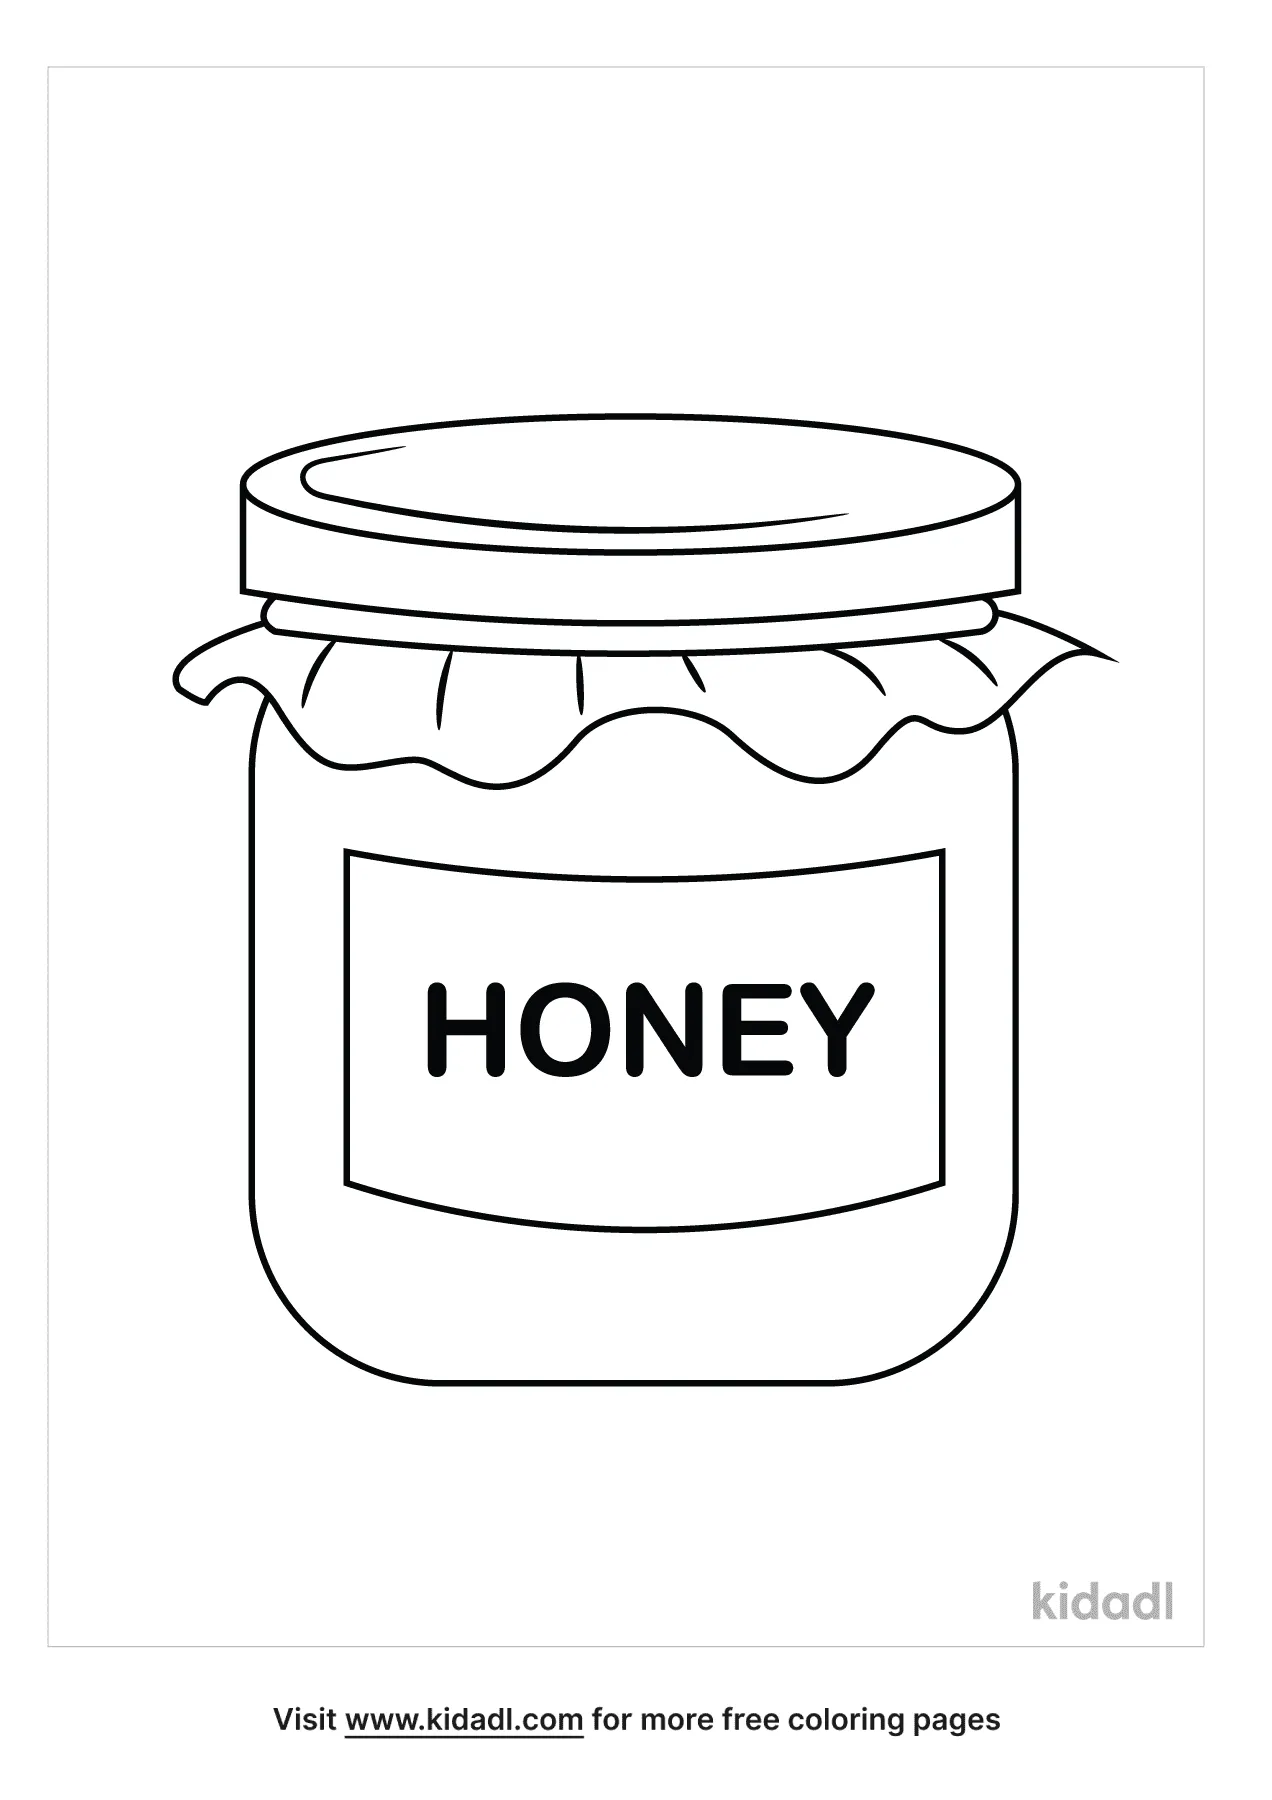 Honey Coloring Pages Free Food Coloring Pages Kidadl